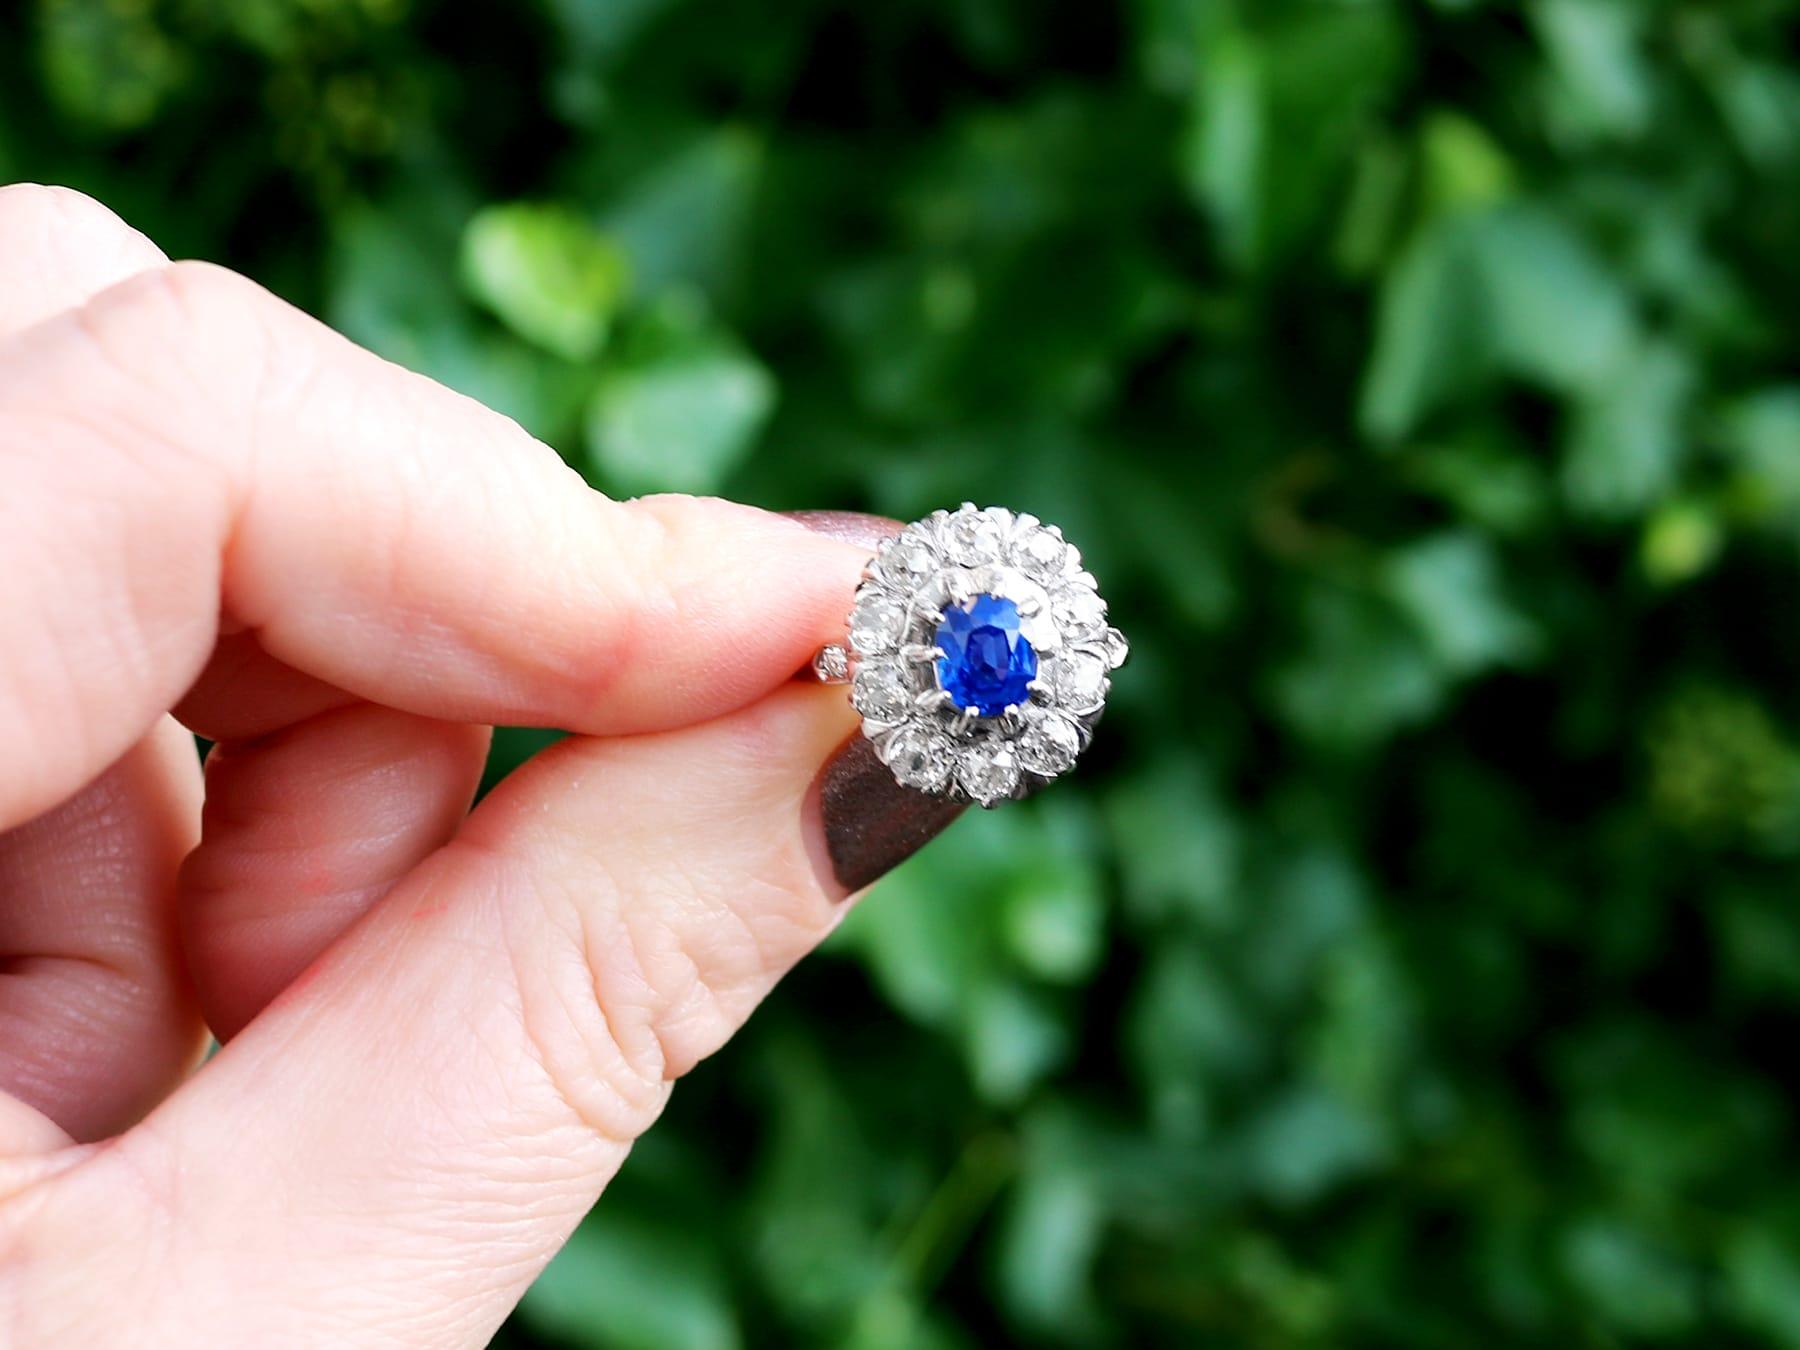 A stunning, fine and impressive antique 1.02 carat Basaltic sapphire and 1.85 carat diamond, 18 karat white gold cocktail ring; part of our diverse antique jewelry and estate jewelry collections.

This stunning, fine and impressive antique sapphire